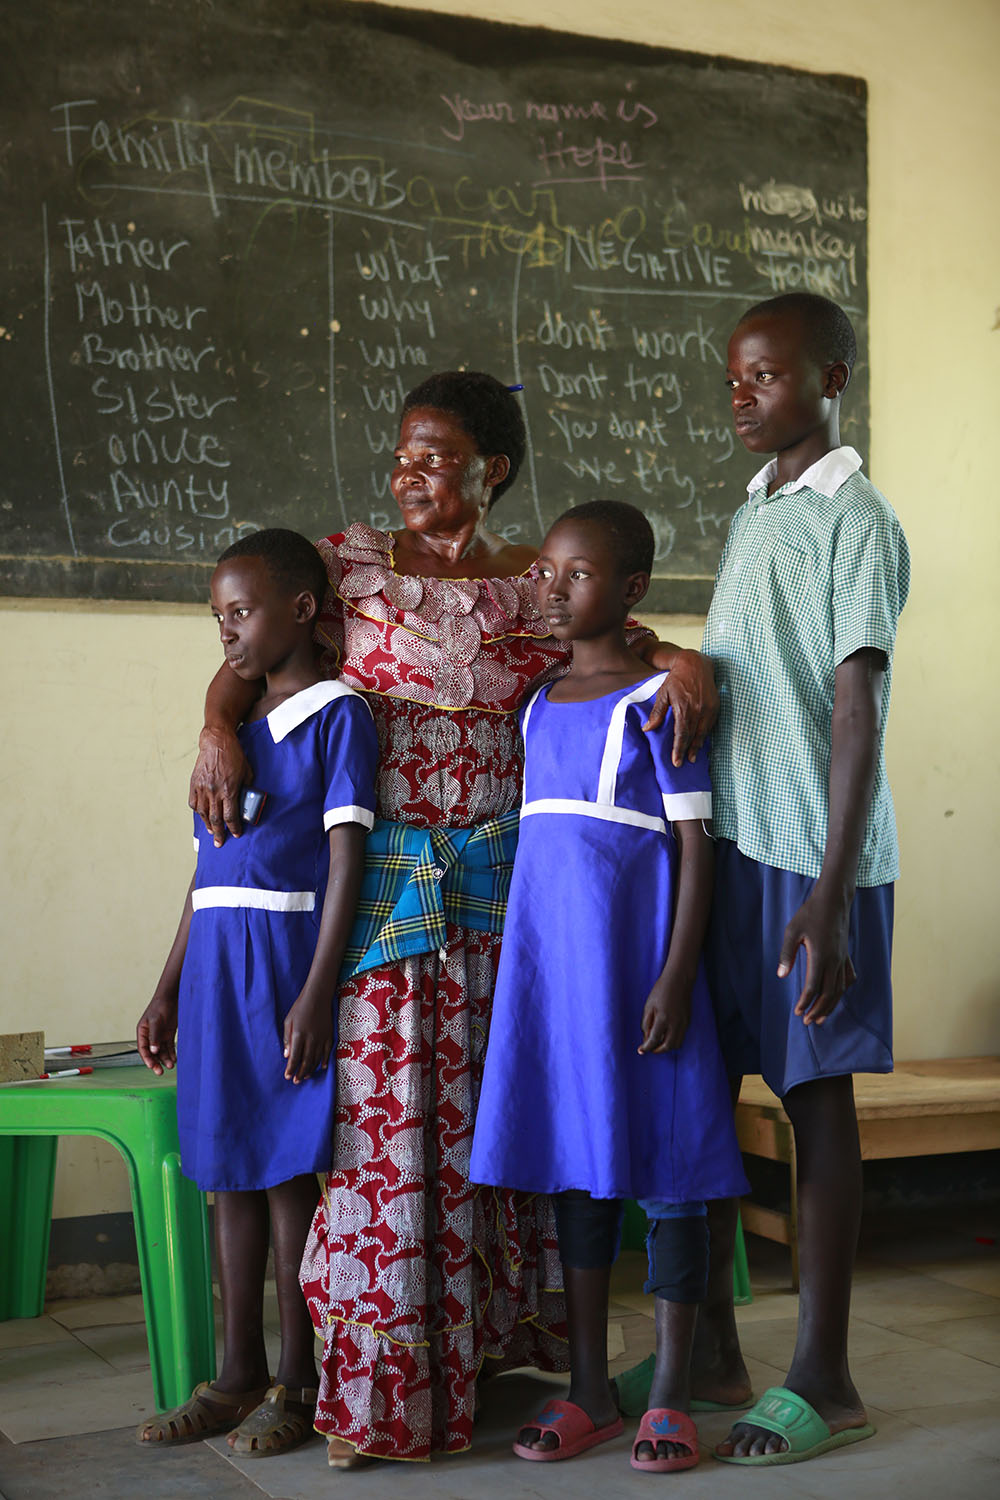 Francoise Mukundu, a teacher at the primary school in Kabazana Reception Centre, Nakivale Refugee Settlement, with three of her pupils, all wearing uniforms she has made for them on her days off.  “I want all my kids to be smart. When I make them uniforms and they get shoes, they are so happy. It makes the other kids want to come to school too.” Francoise is also a refugee, from Democratic Republic of Congo.  She lost her entire family in DRC and came alone to Uganda.